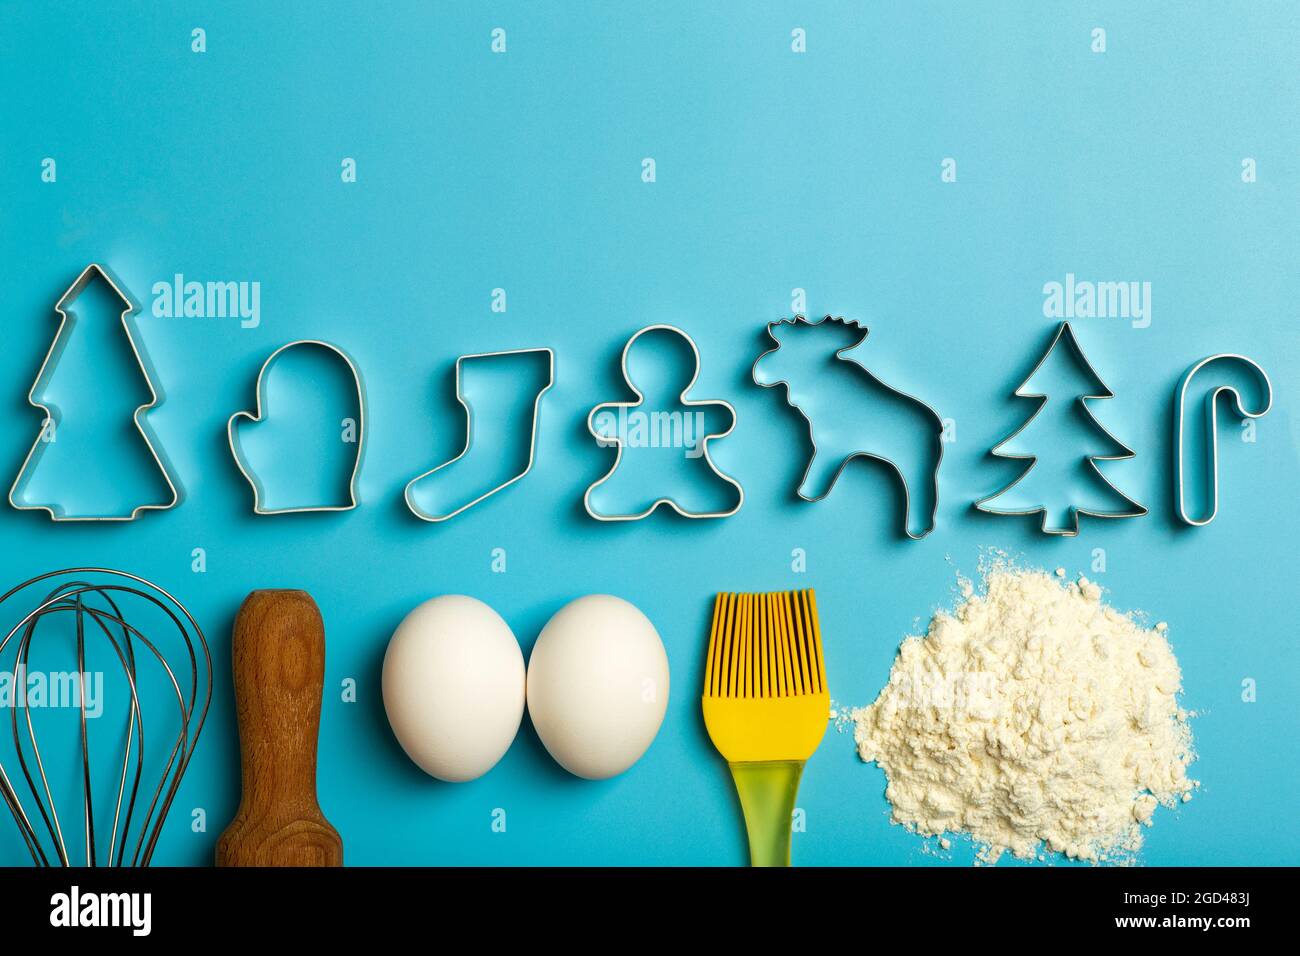 https://c8.alamy.com/comp/2GD483J/christmas-baking-background-christmas-cookie-cutters-molds-on-the-kitchen-baking-table-festive-food-and-new-years-mood-high-quality-photo-2GD483J.jpg